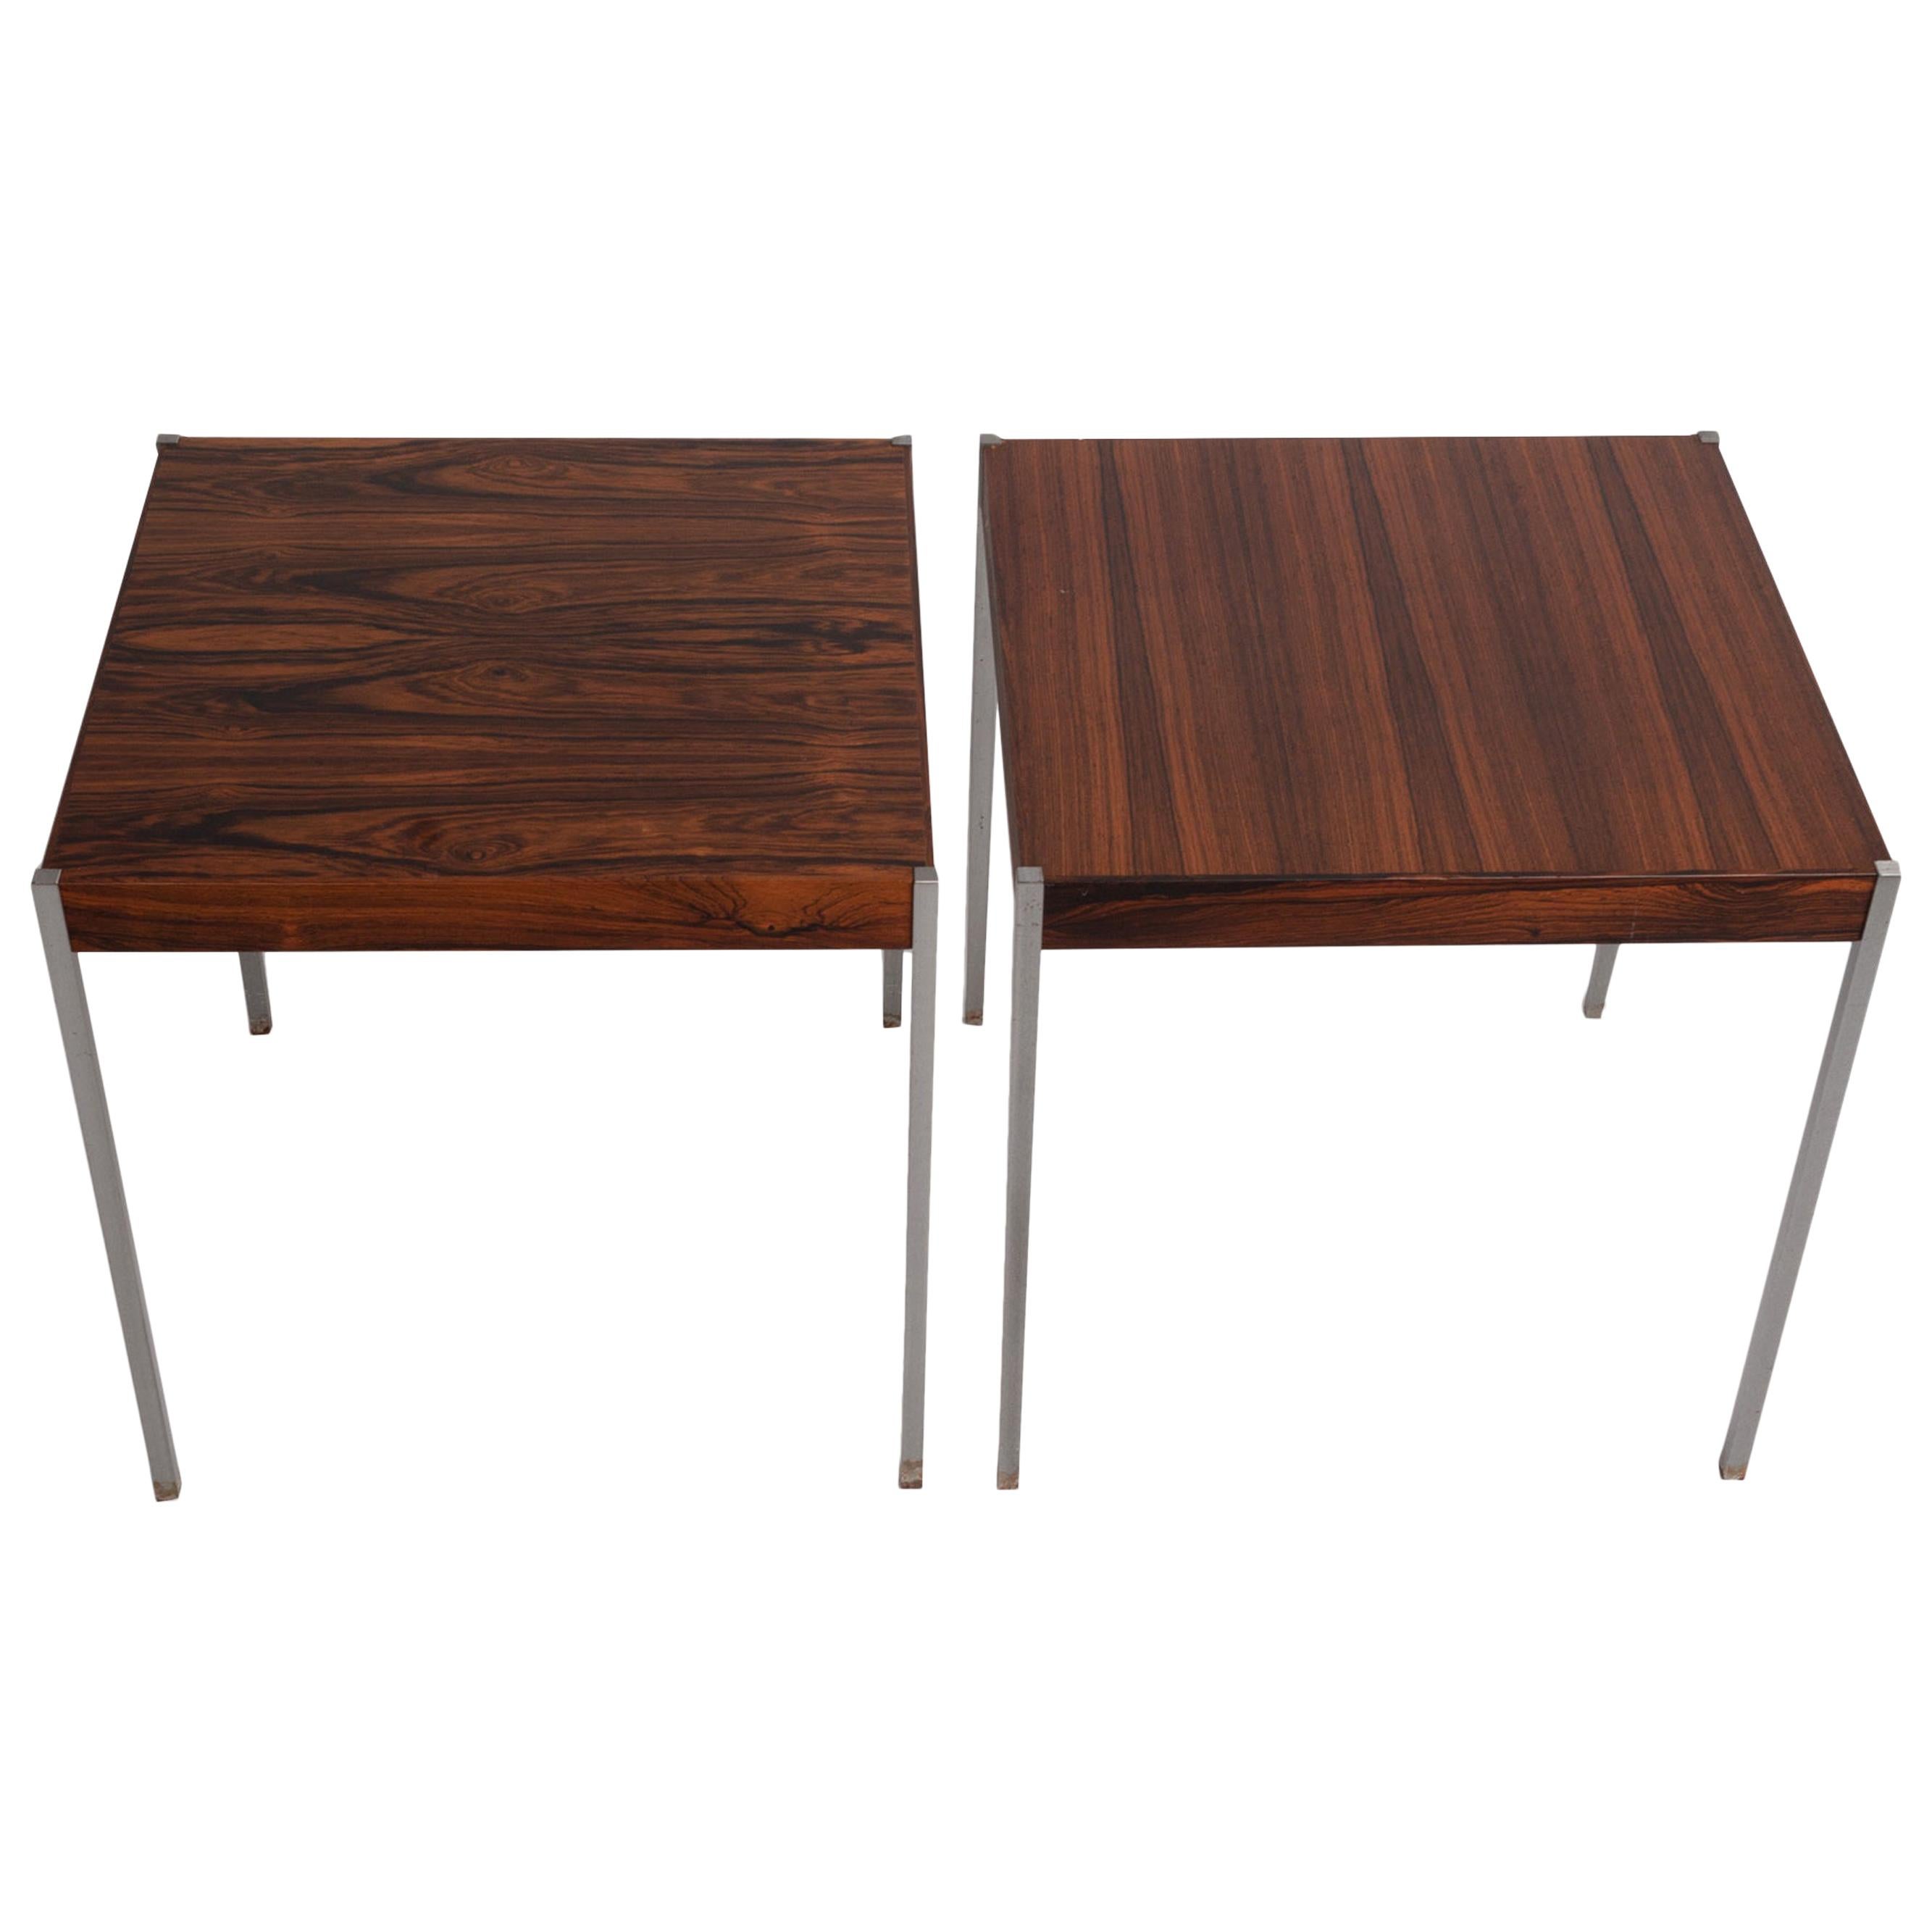 Pair of Midcentury Rosewood Side Tables by Uno & Östen Kristiansson for Luxus For Sale